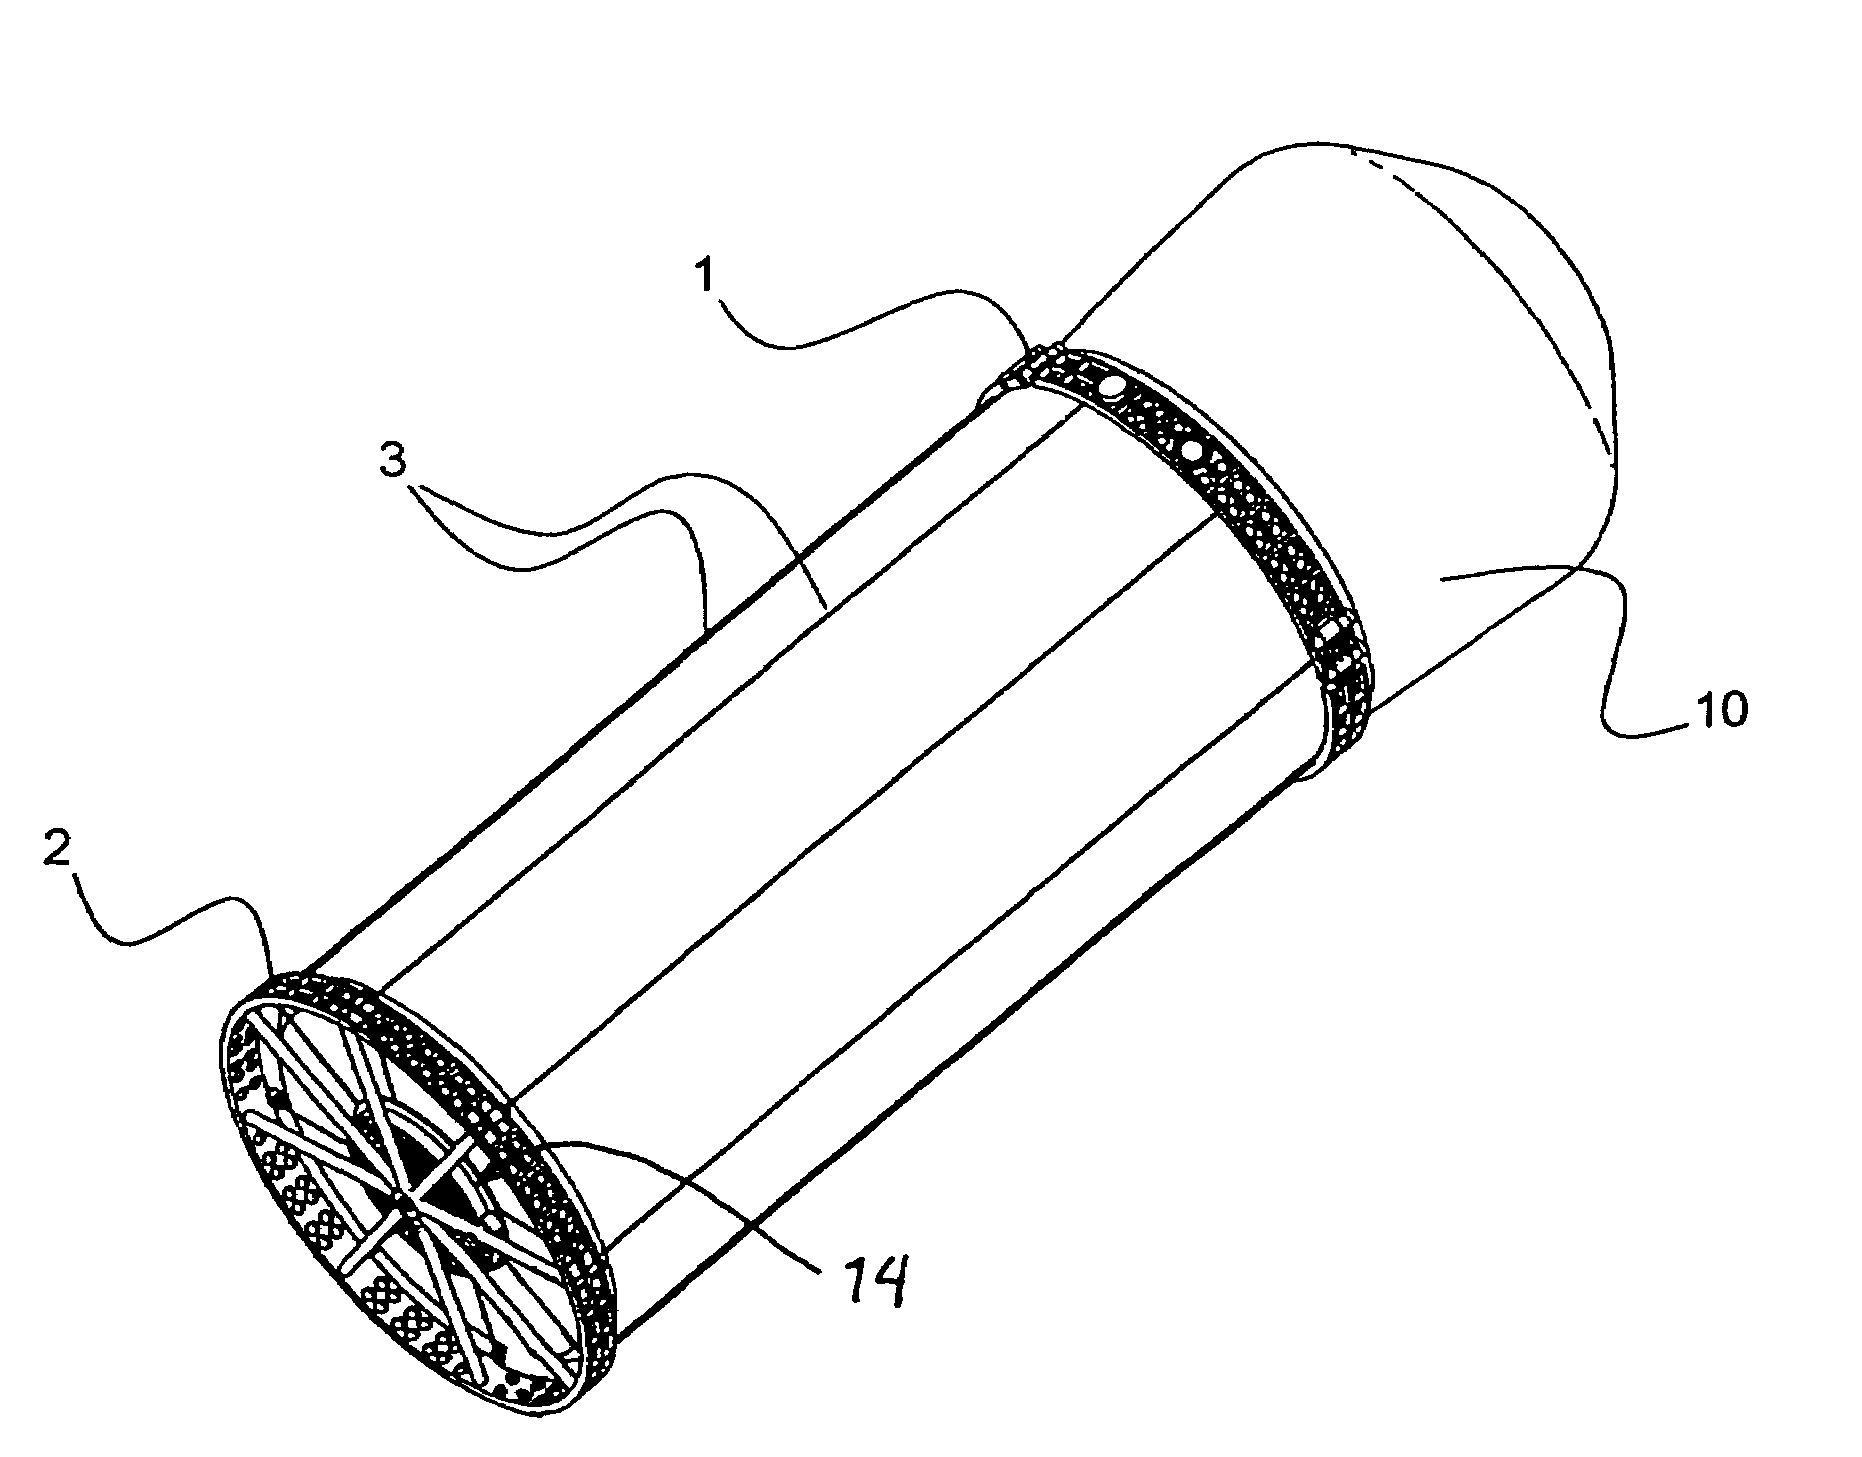 Apparatus with axis-parallel tension cables for ejecting a spin-stabilized body from a spacecraft